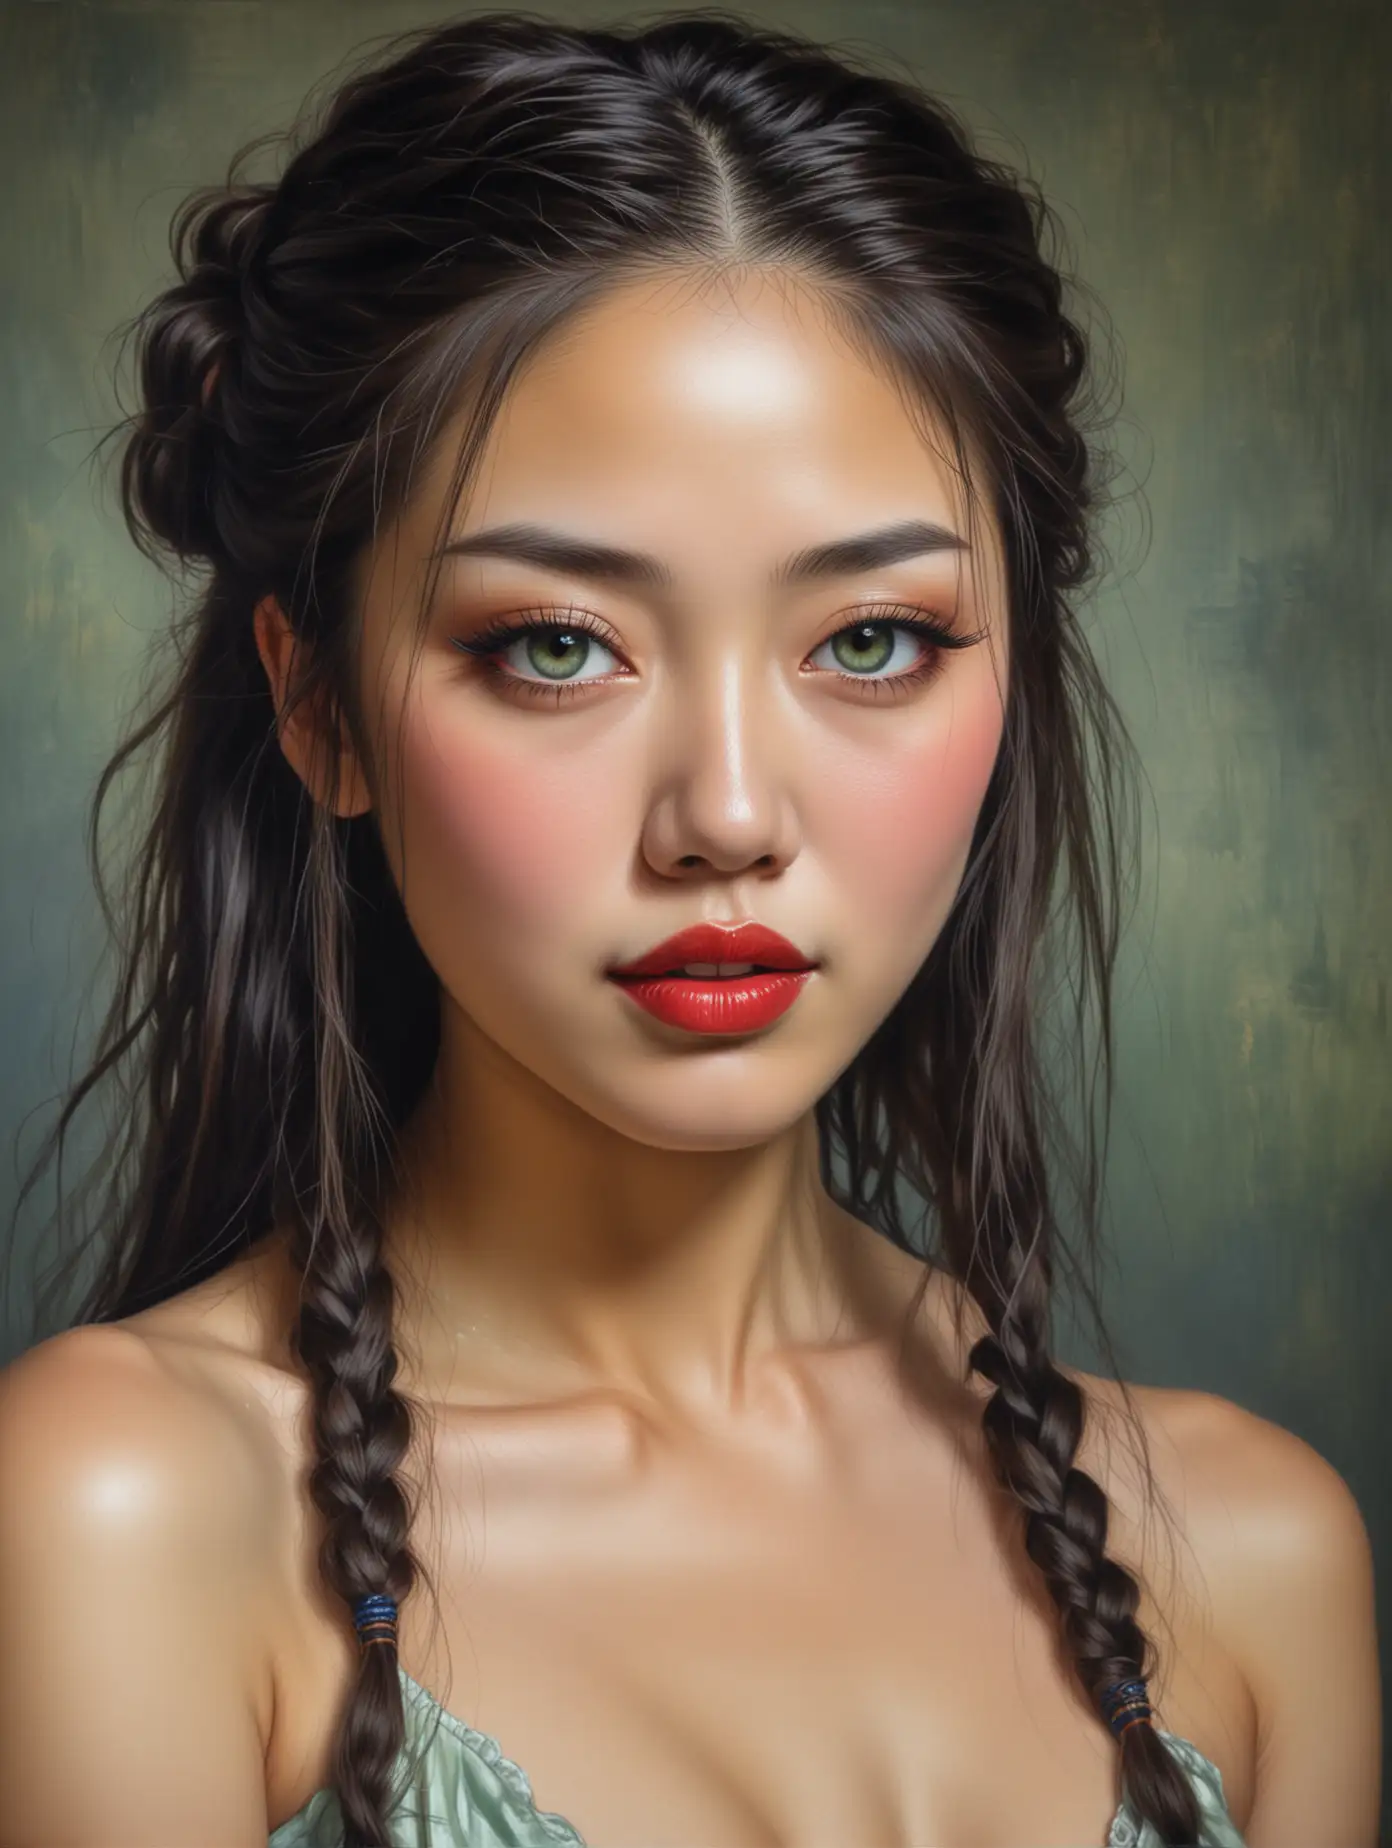 GreenEyed-Chinese-Maiden-Portrait-Captivating-Nude-Oil-Painting-with-Vibrant-HDR-Effect